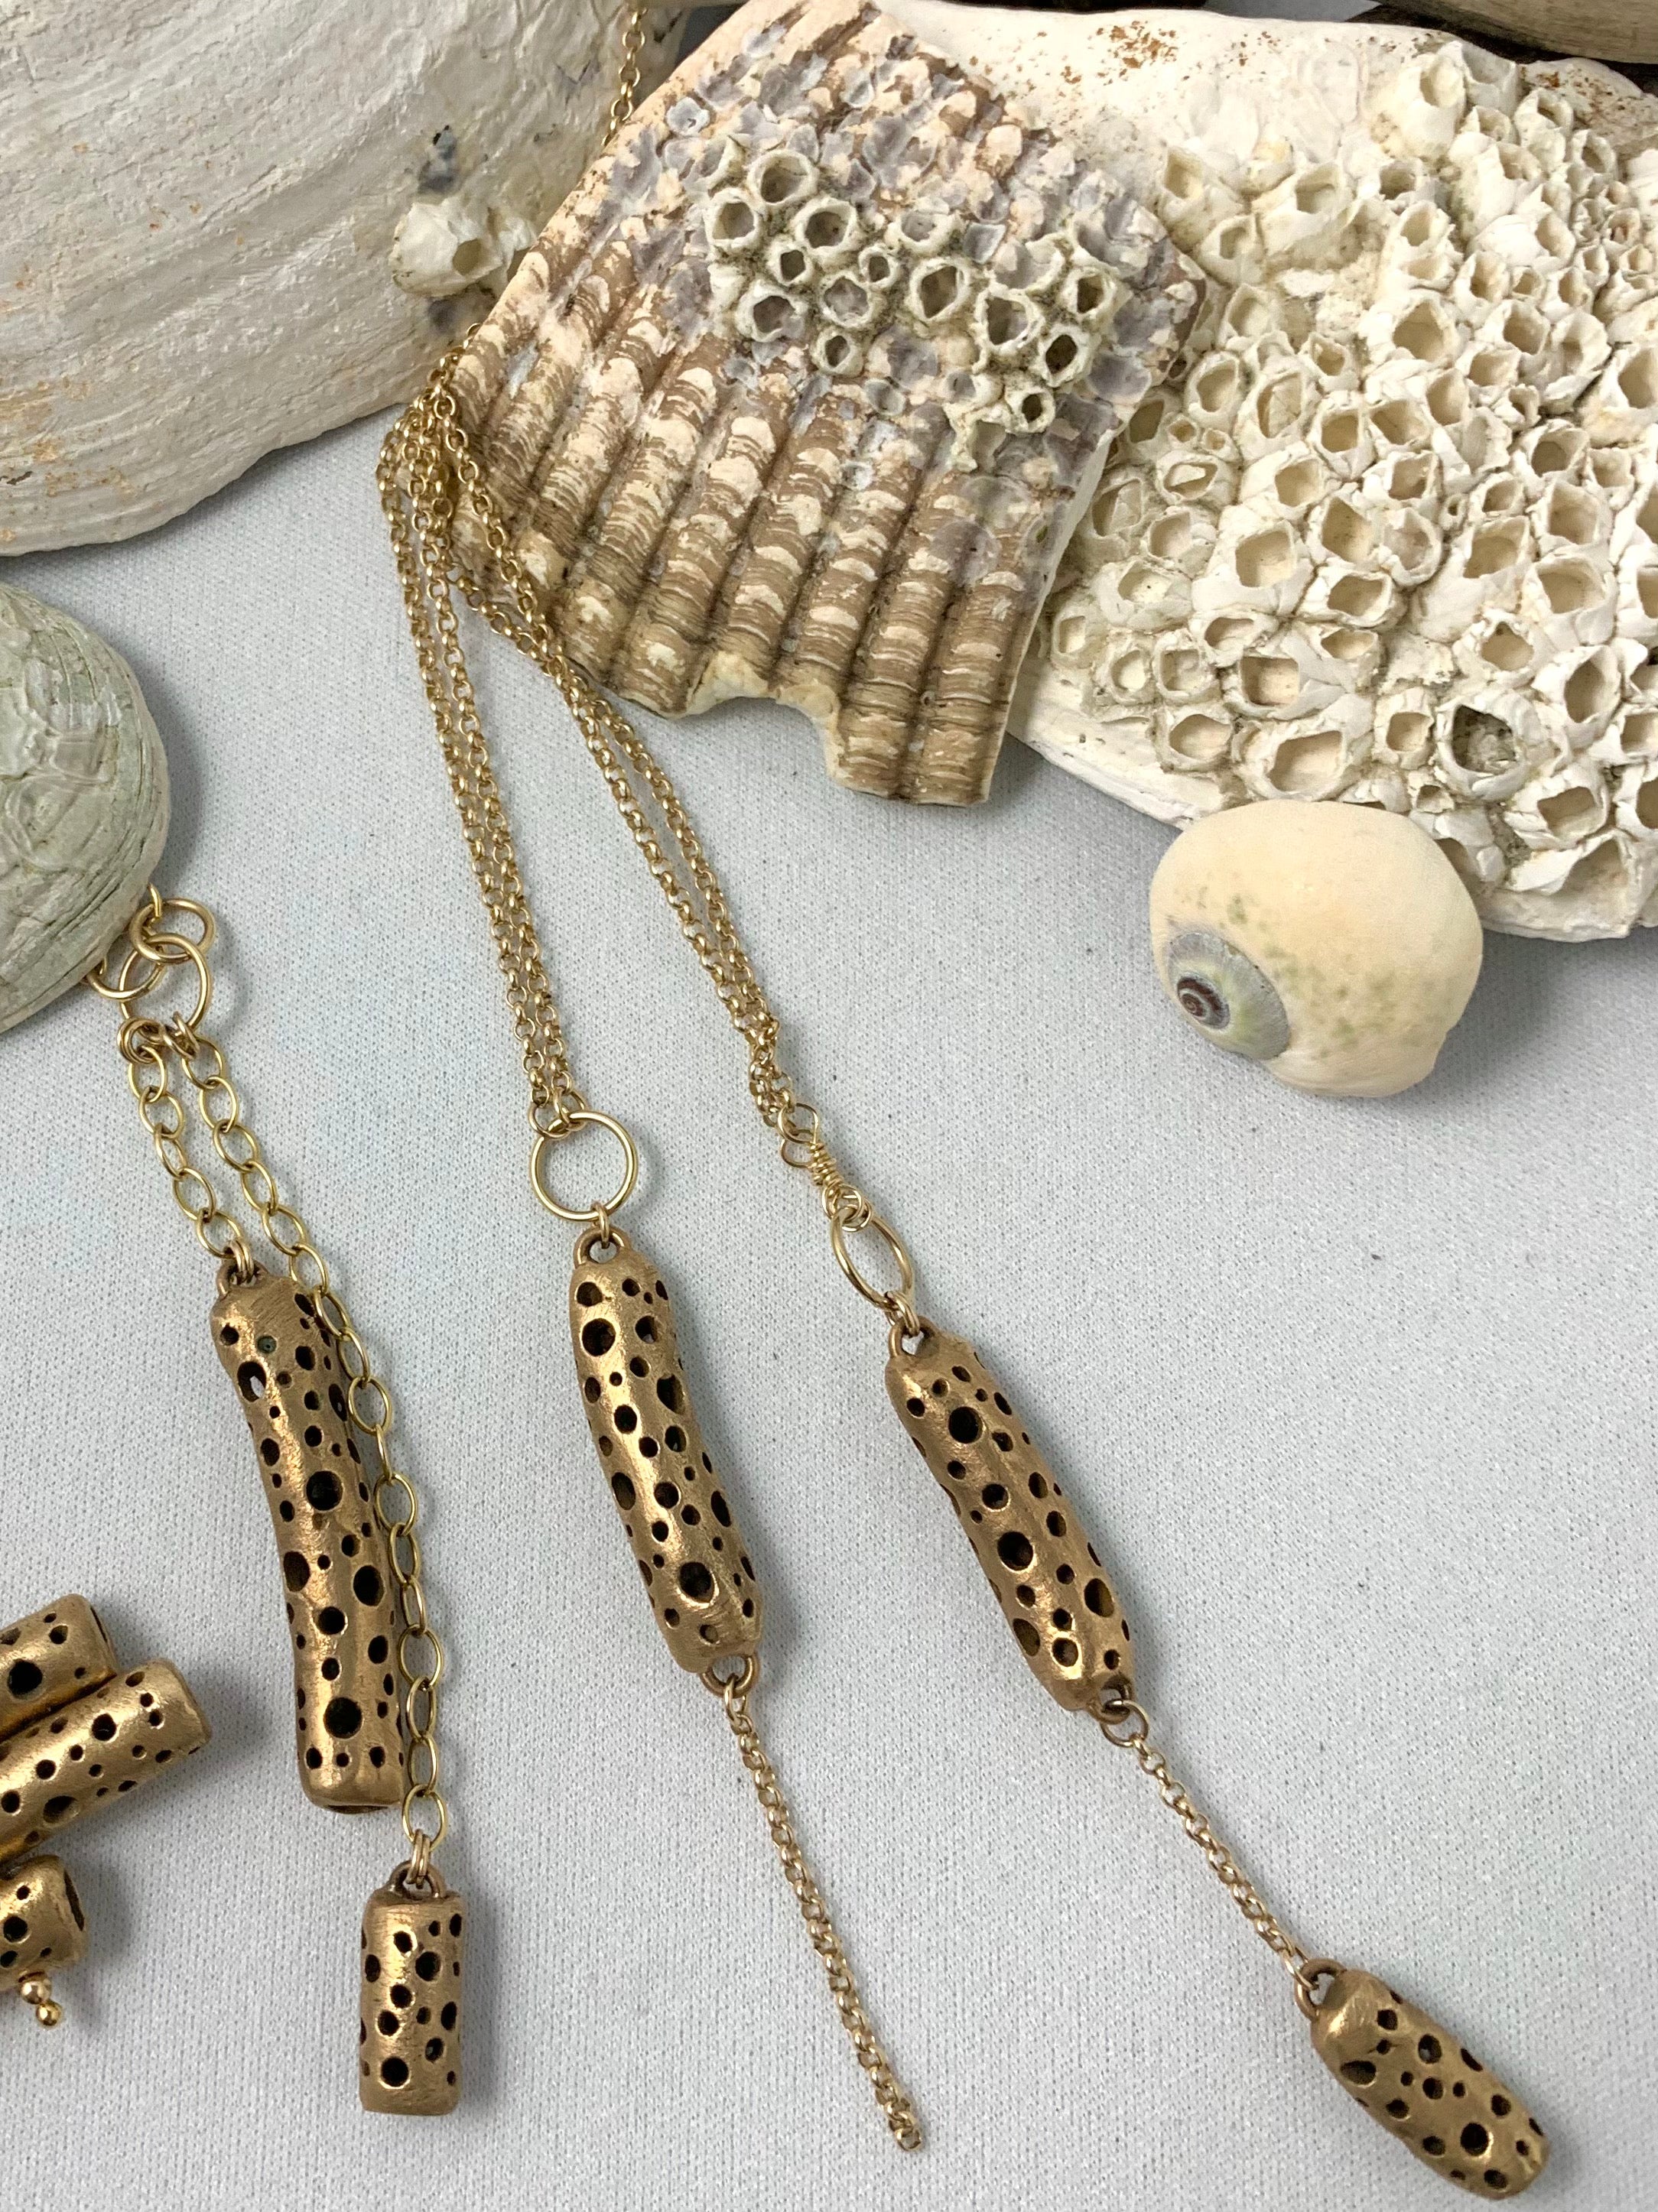 Coral inspired handmade bronze necklaces